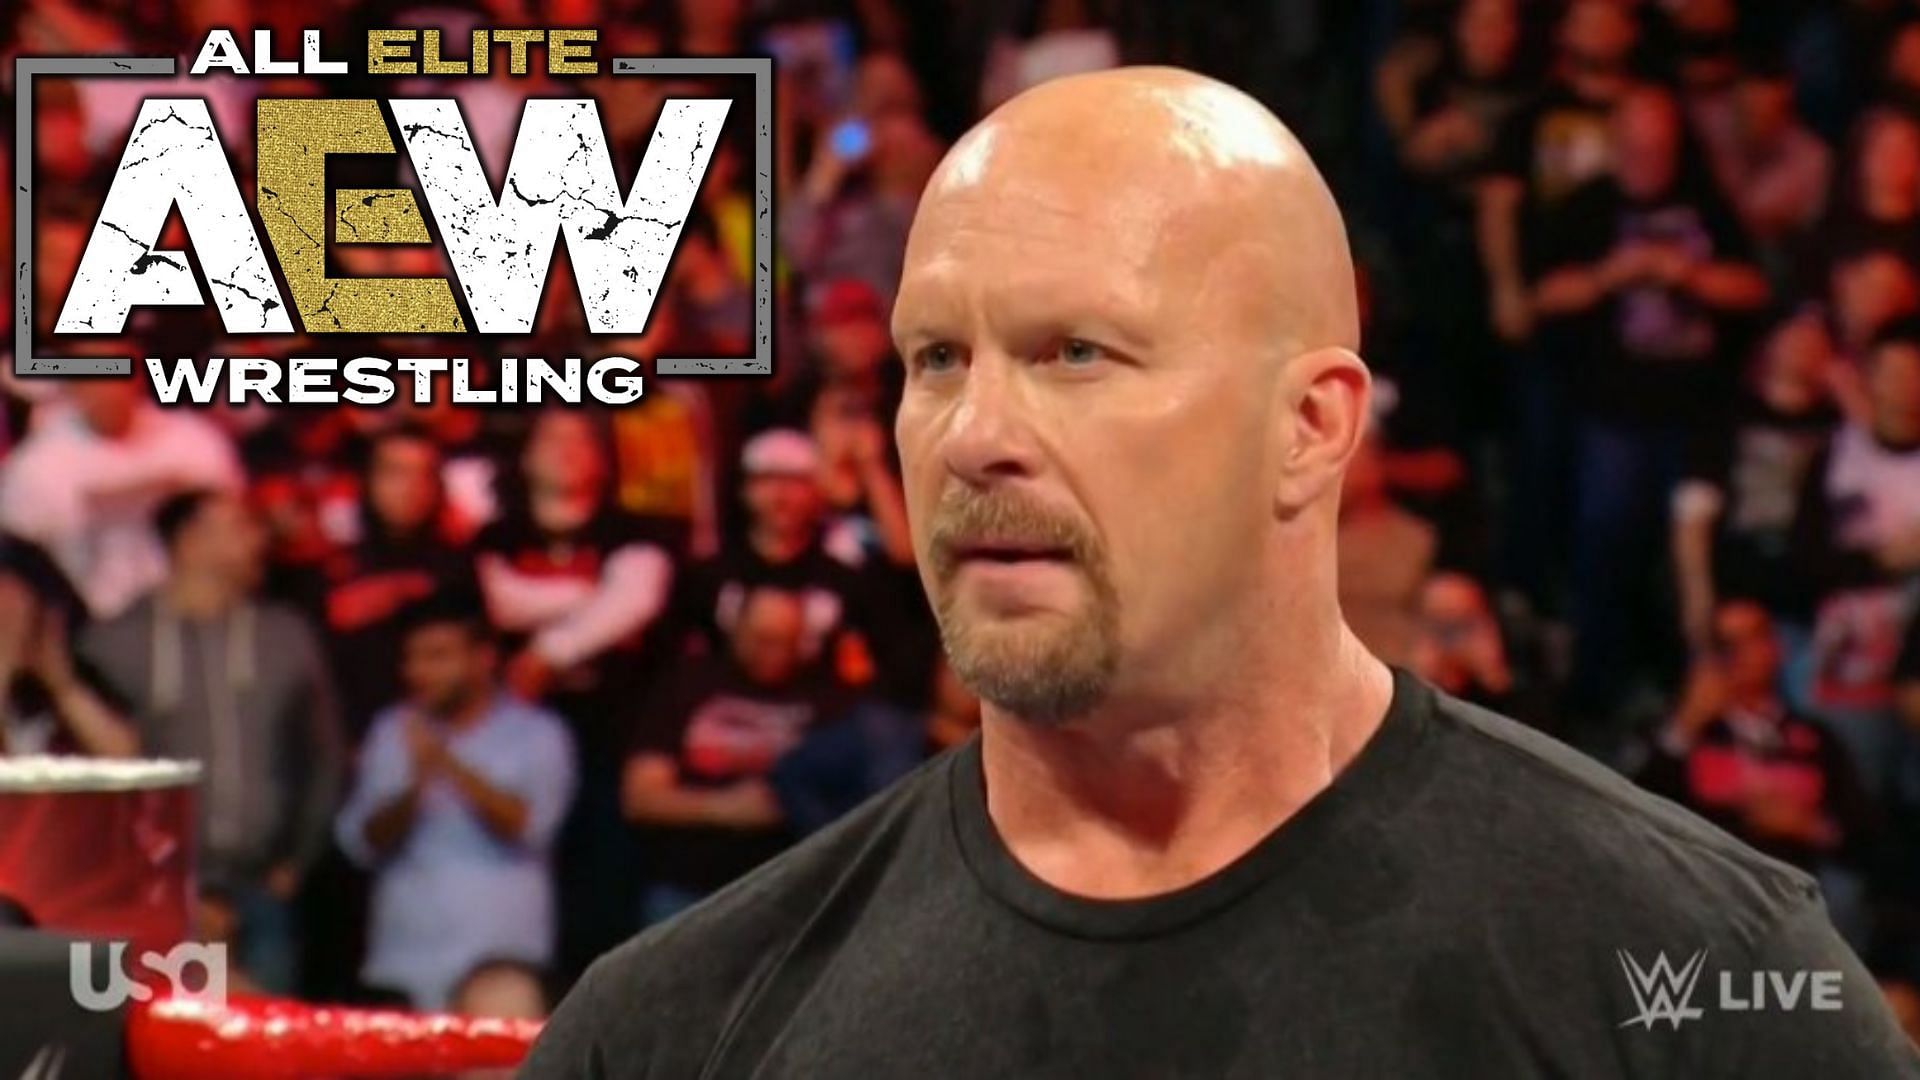 Stone Cold recently returned to wrestling after his retirement in 2003.